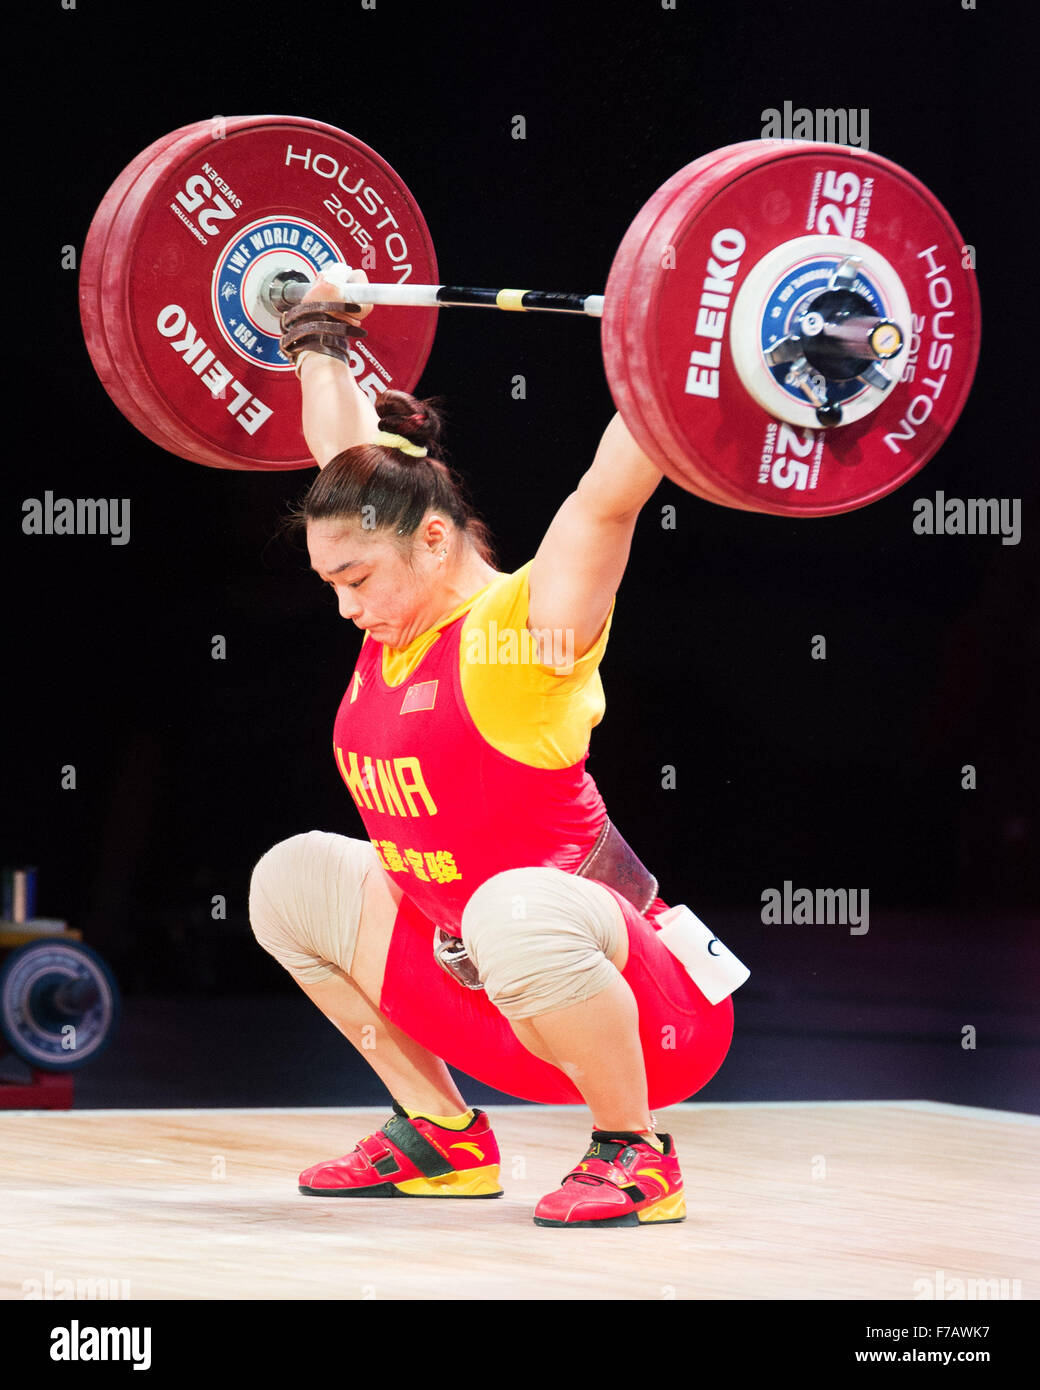 Houston, Texas, USA. November 26, 2015: Kang Yue of China wins the snatch gold and the total gold medas at the World Weightlifting Championshipsl in Houston, Texas. Credit:  Brent Clark/Alamy Live News Stock Photo